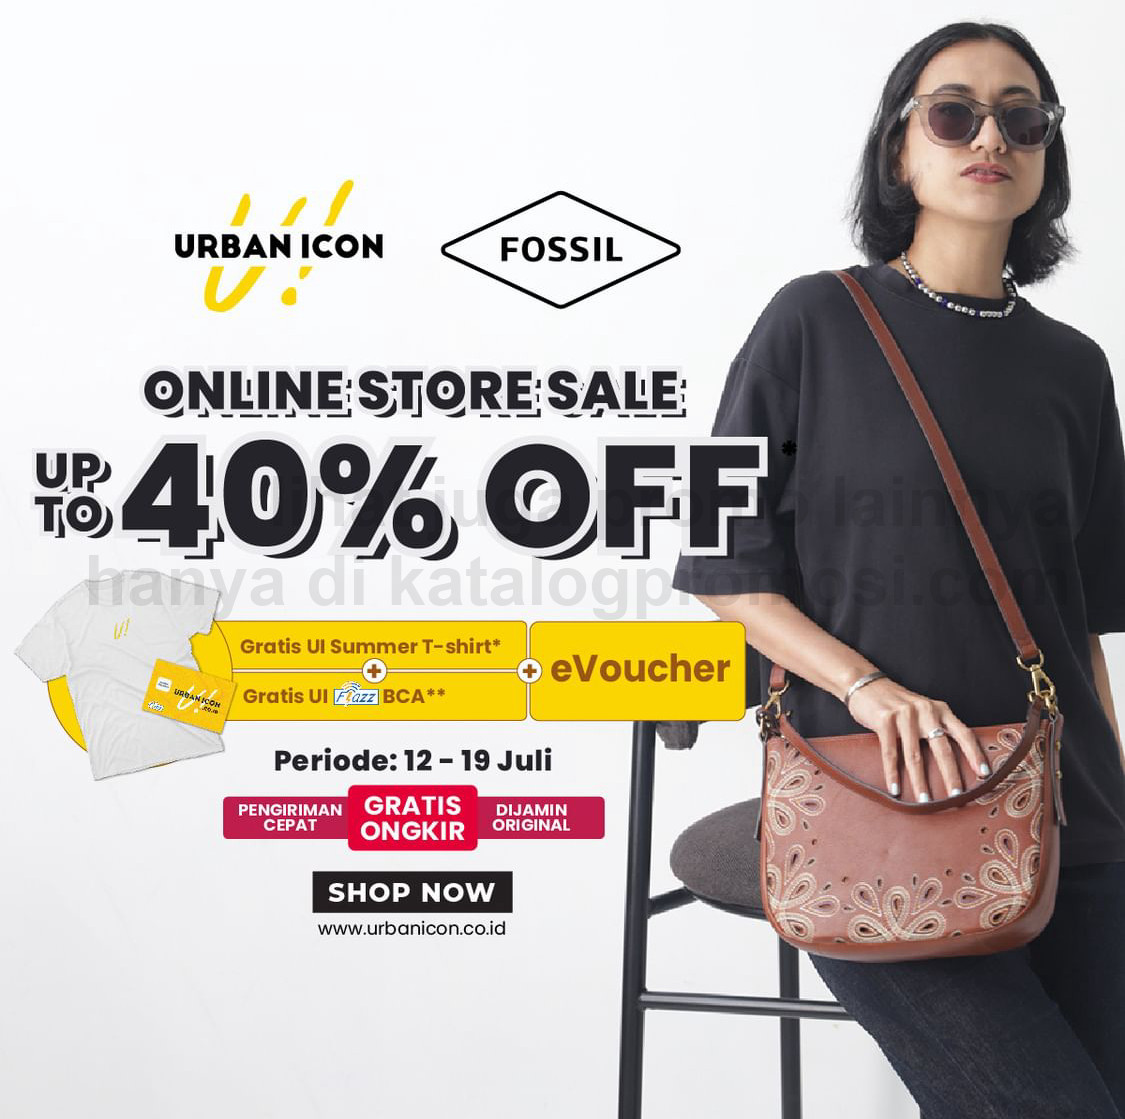 Promo URBAN ICON ONLINE STORE SALE - Discount Up To 40% Off*